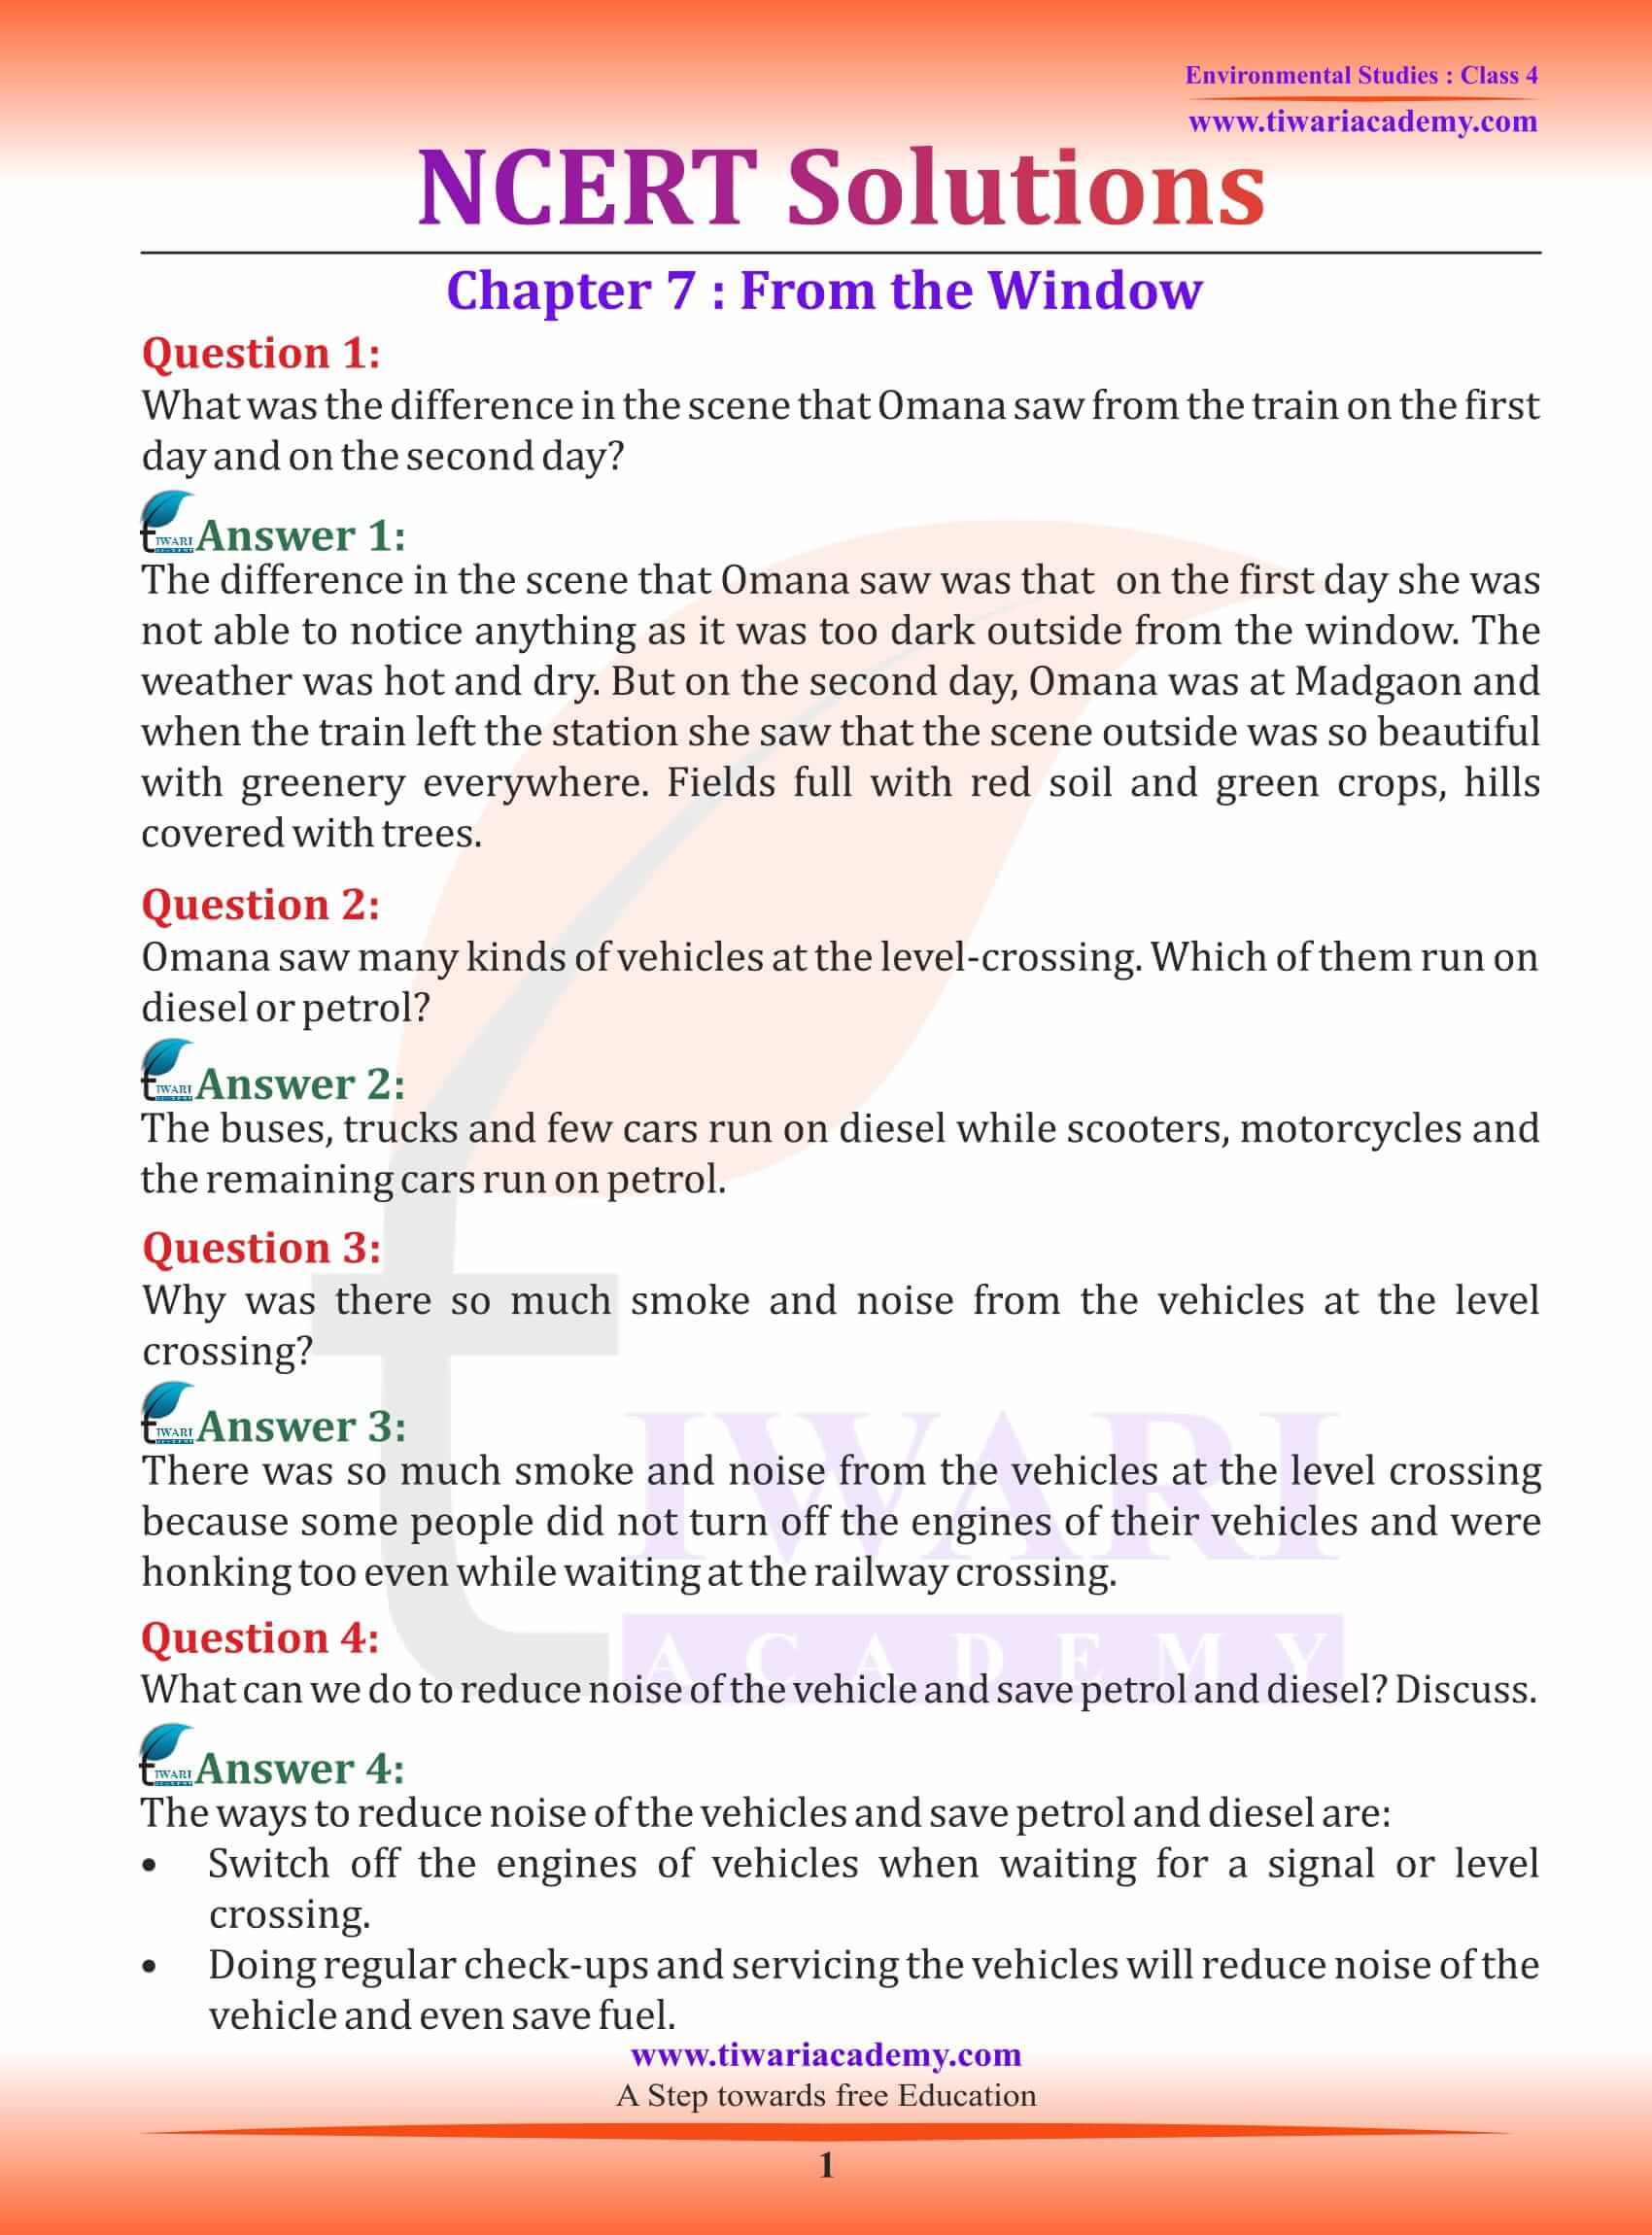 NCERT Solutions for Class 4 EVS Chapter 7 From the Window